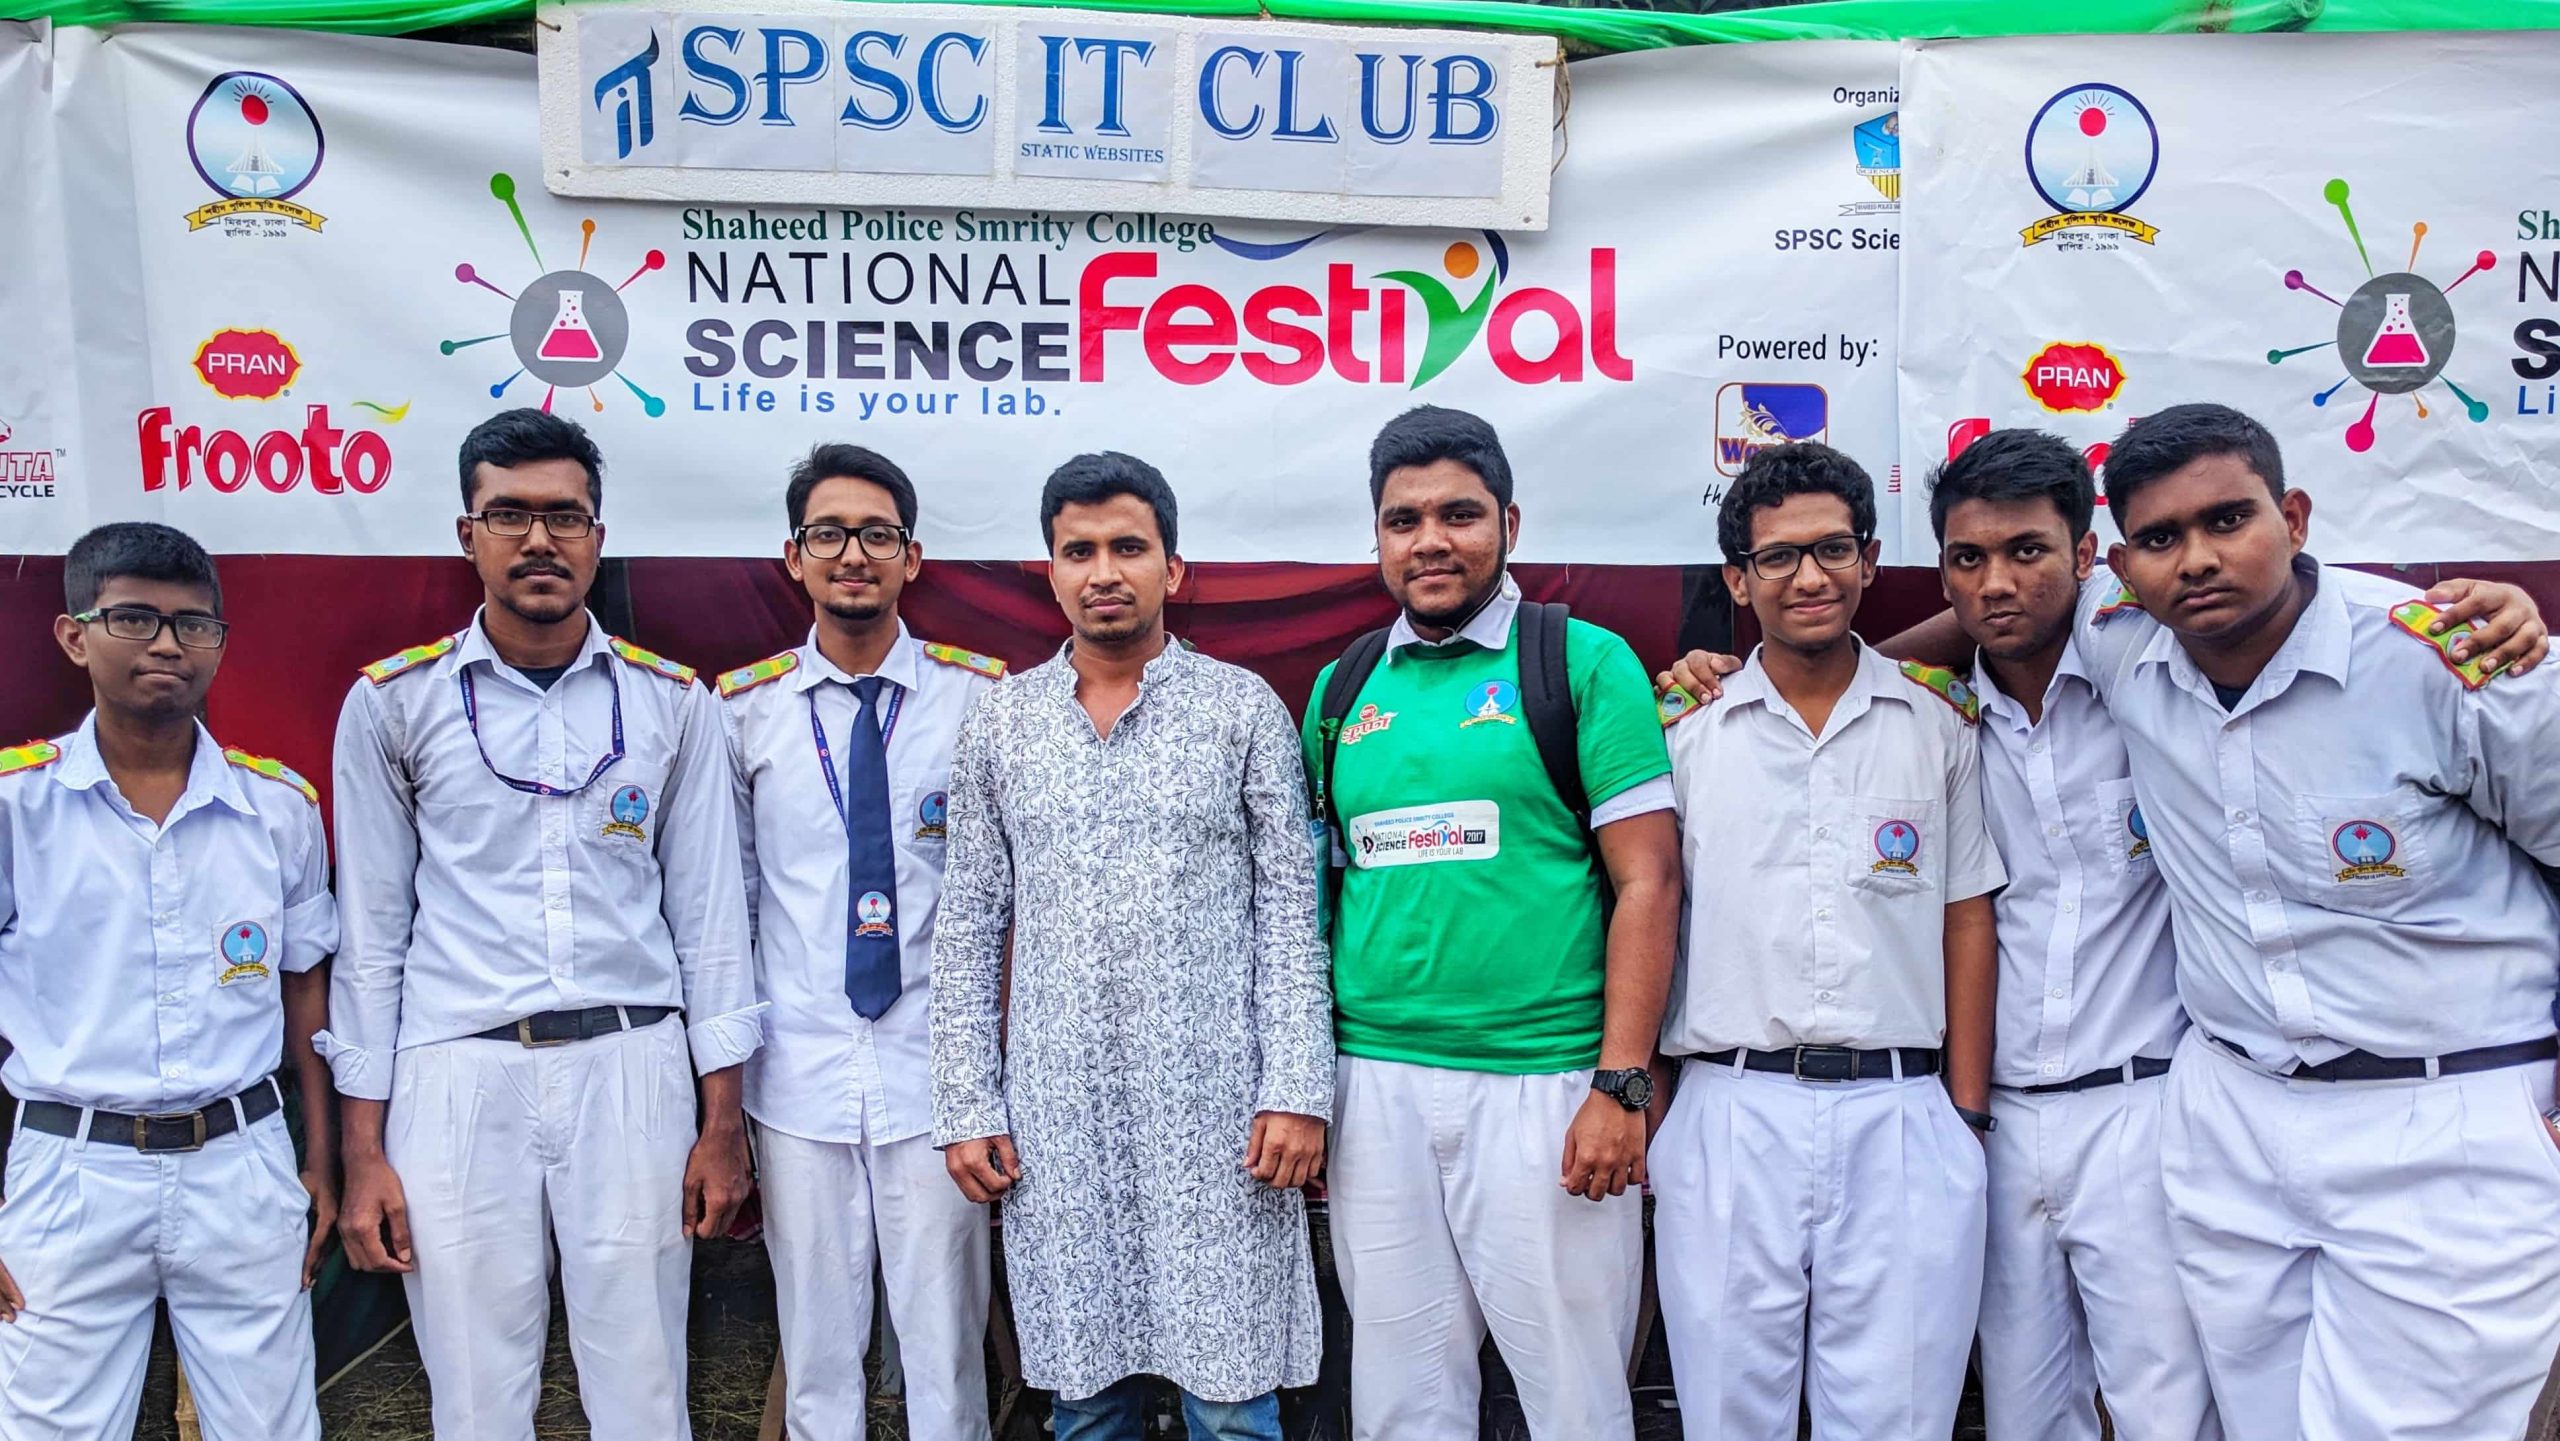 Pran Frooto National Science Festival at Shaheed Police Smrity College